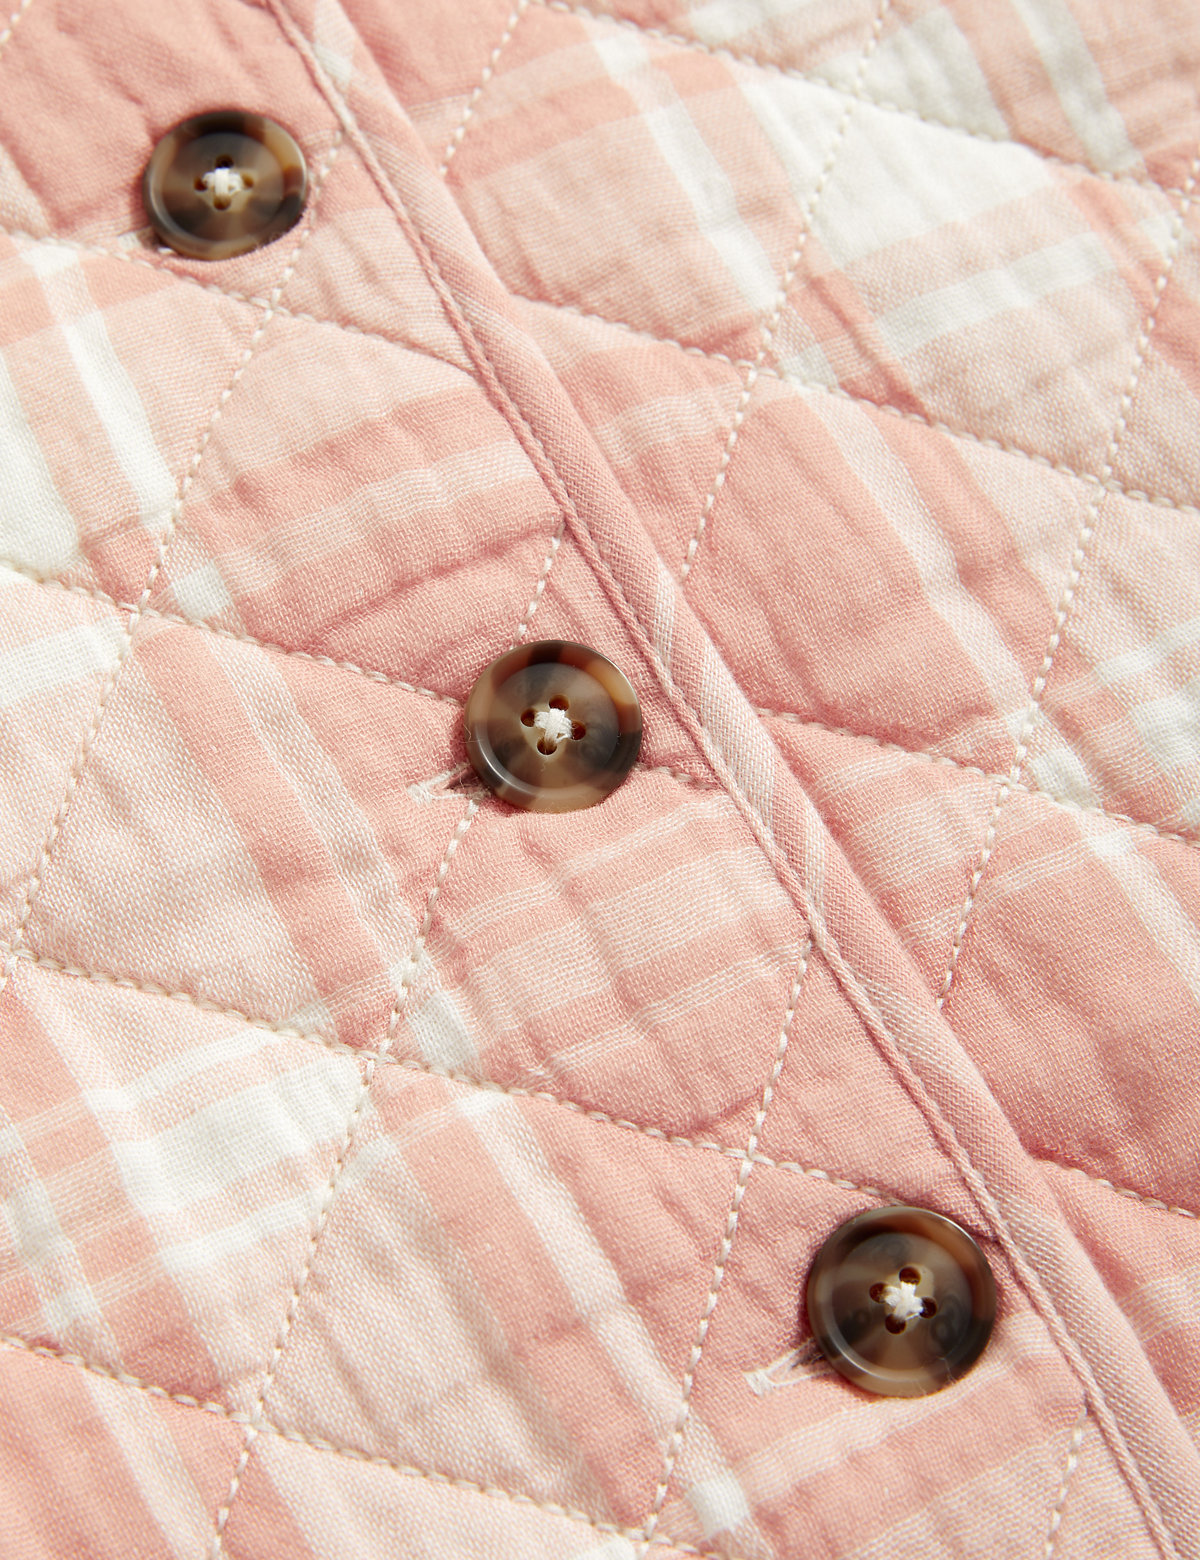 Cotton Rich Checked Jacket (2-8 Yrs)